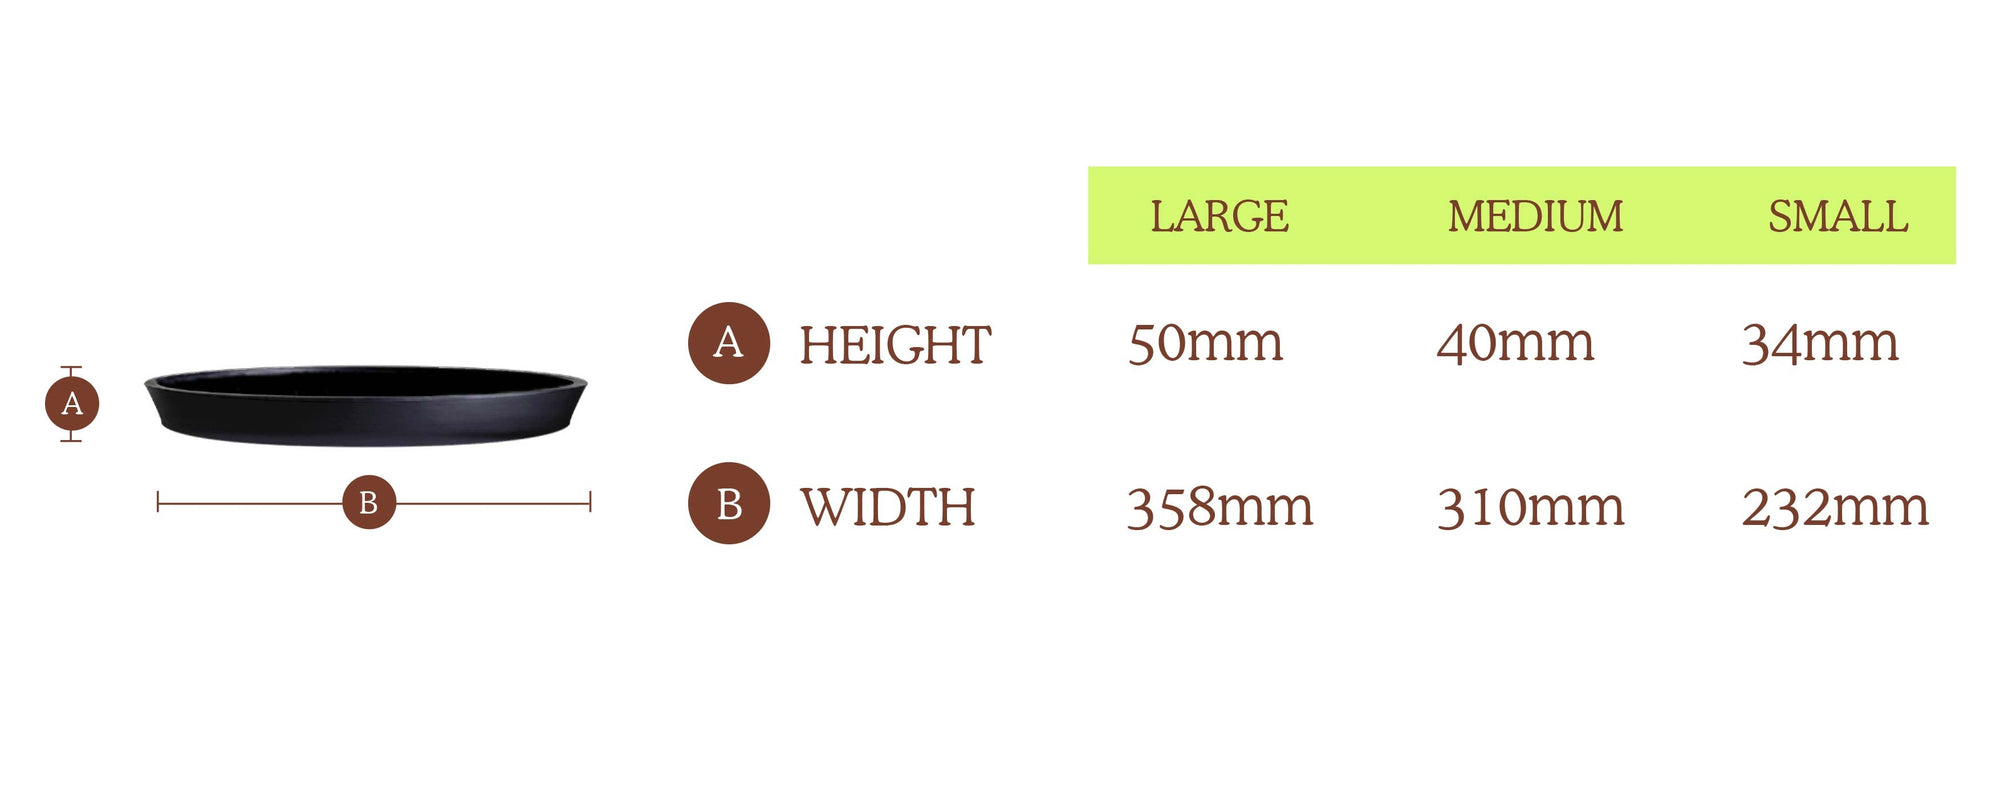 A large Tray is 50 millimeters in height and 358 millimeters in width. A medium Tray is 40 millimeters in height and 310 millimetres in width. A small Tray is 34 millimetres in height and 232 millimetres in width.